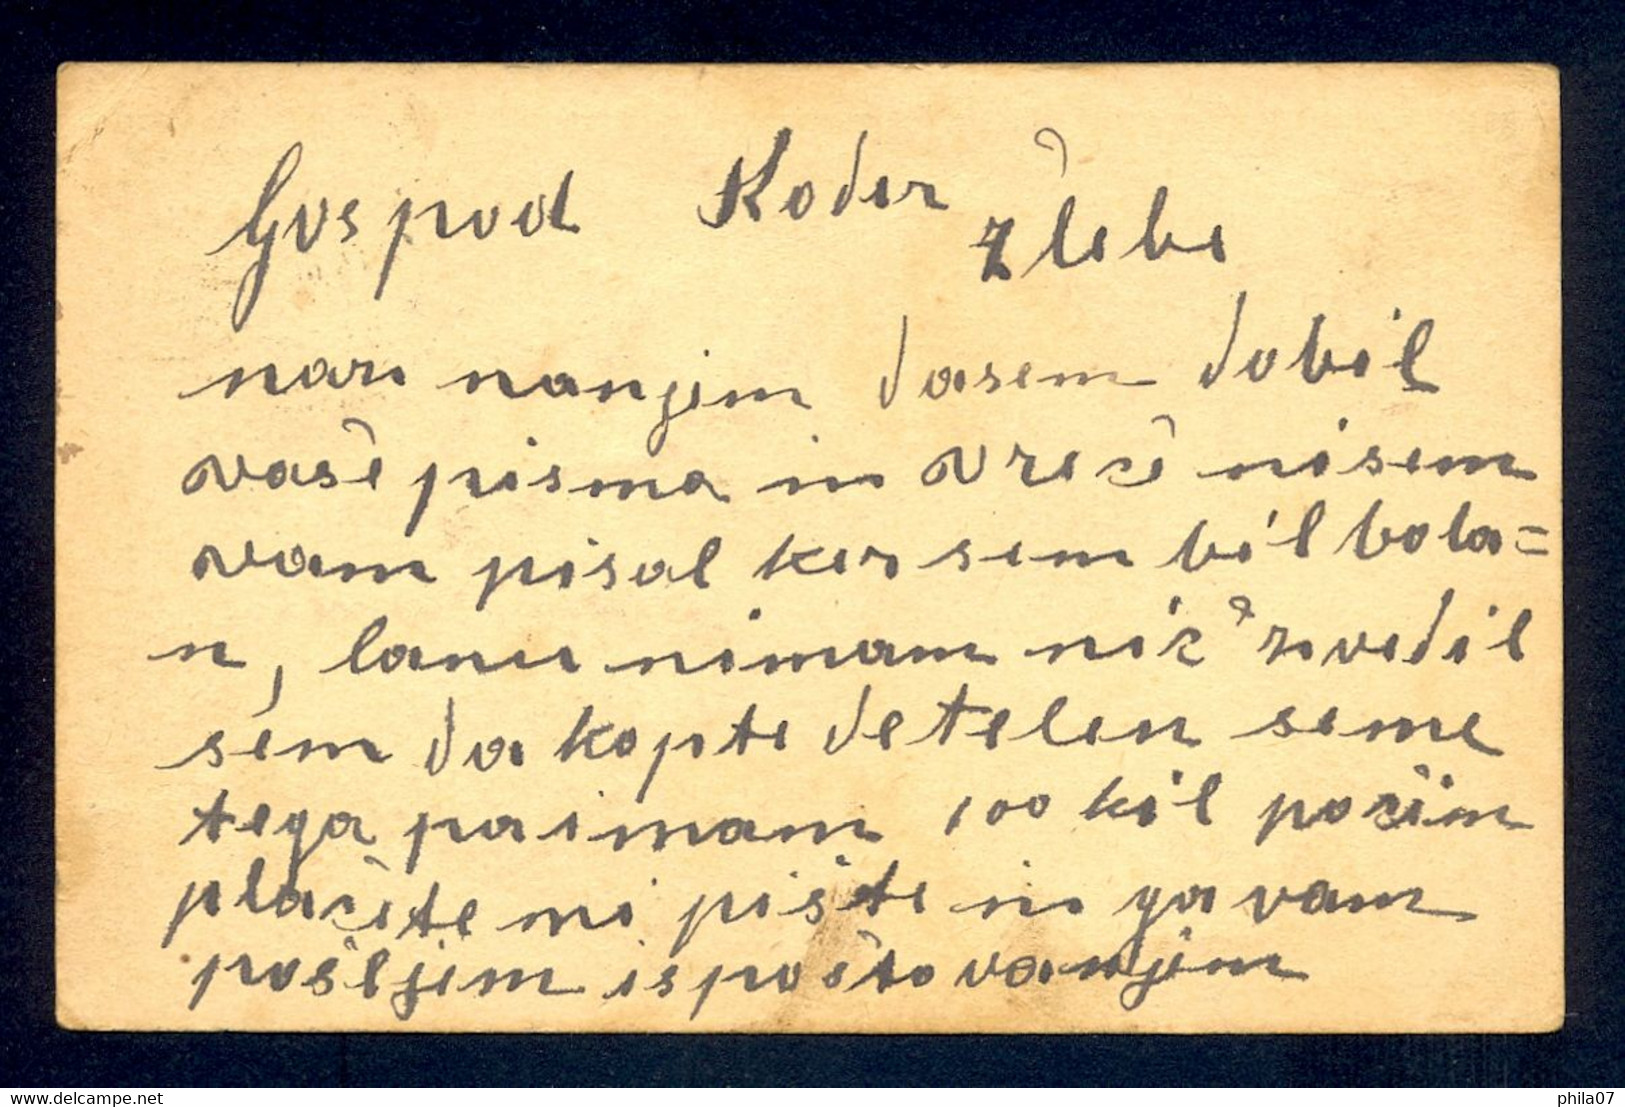 SLOVENIA - Stationery Sent By Railway Track BUBNJARI-LAIBACH To Medvode 16.03. 1916. - Slovenia